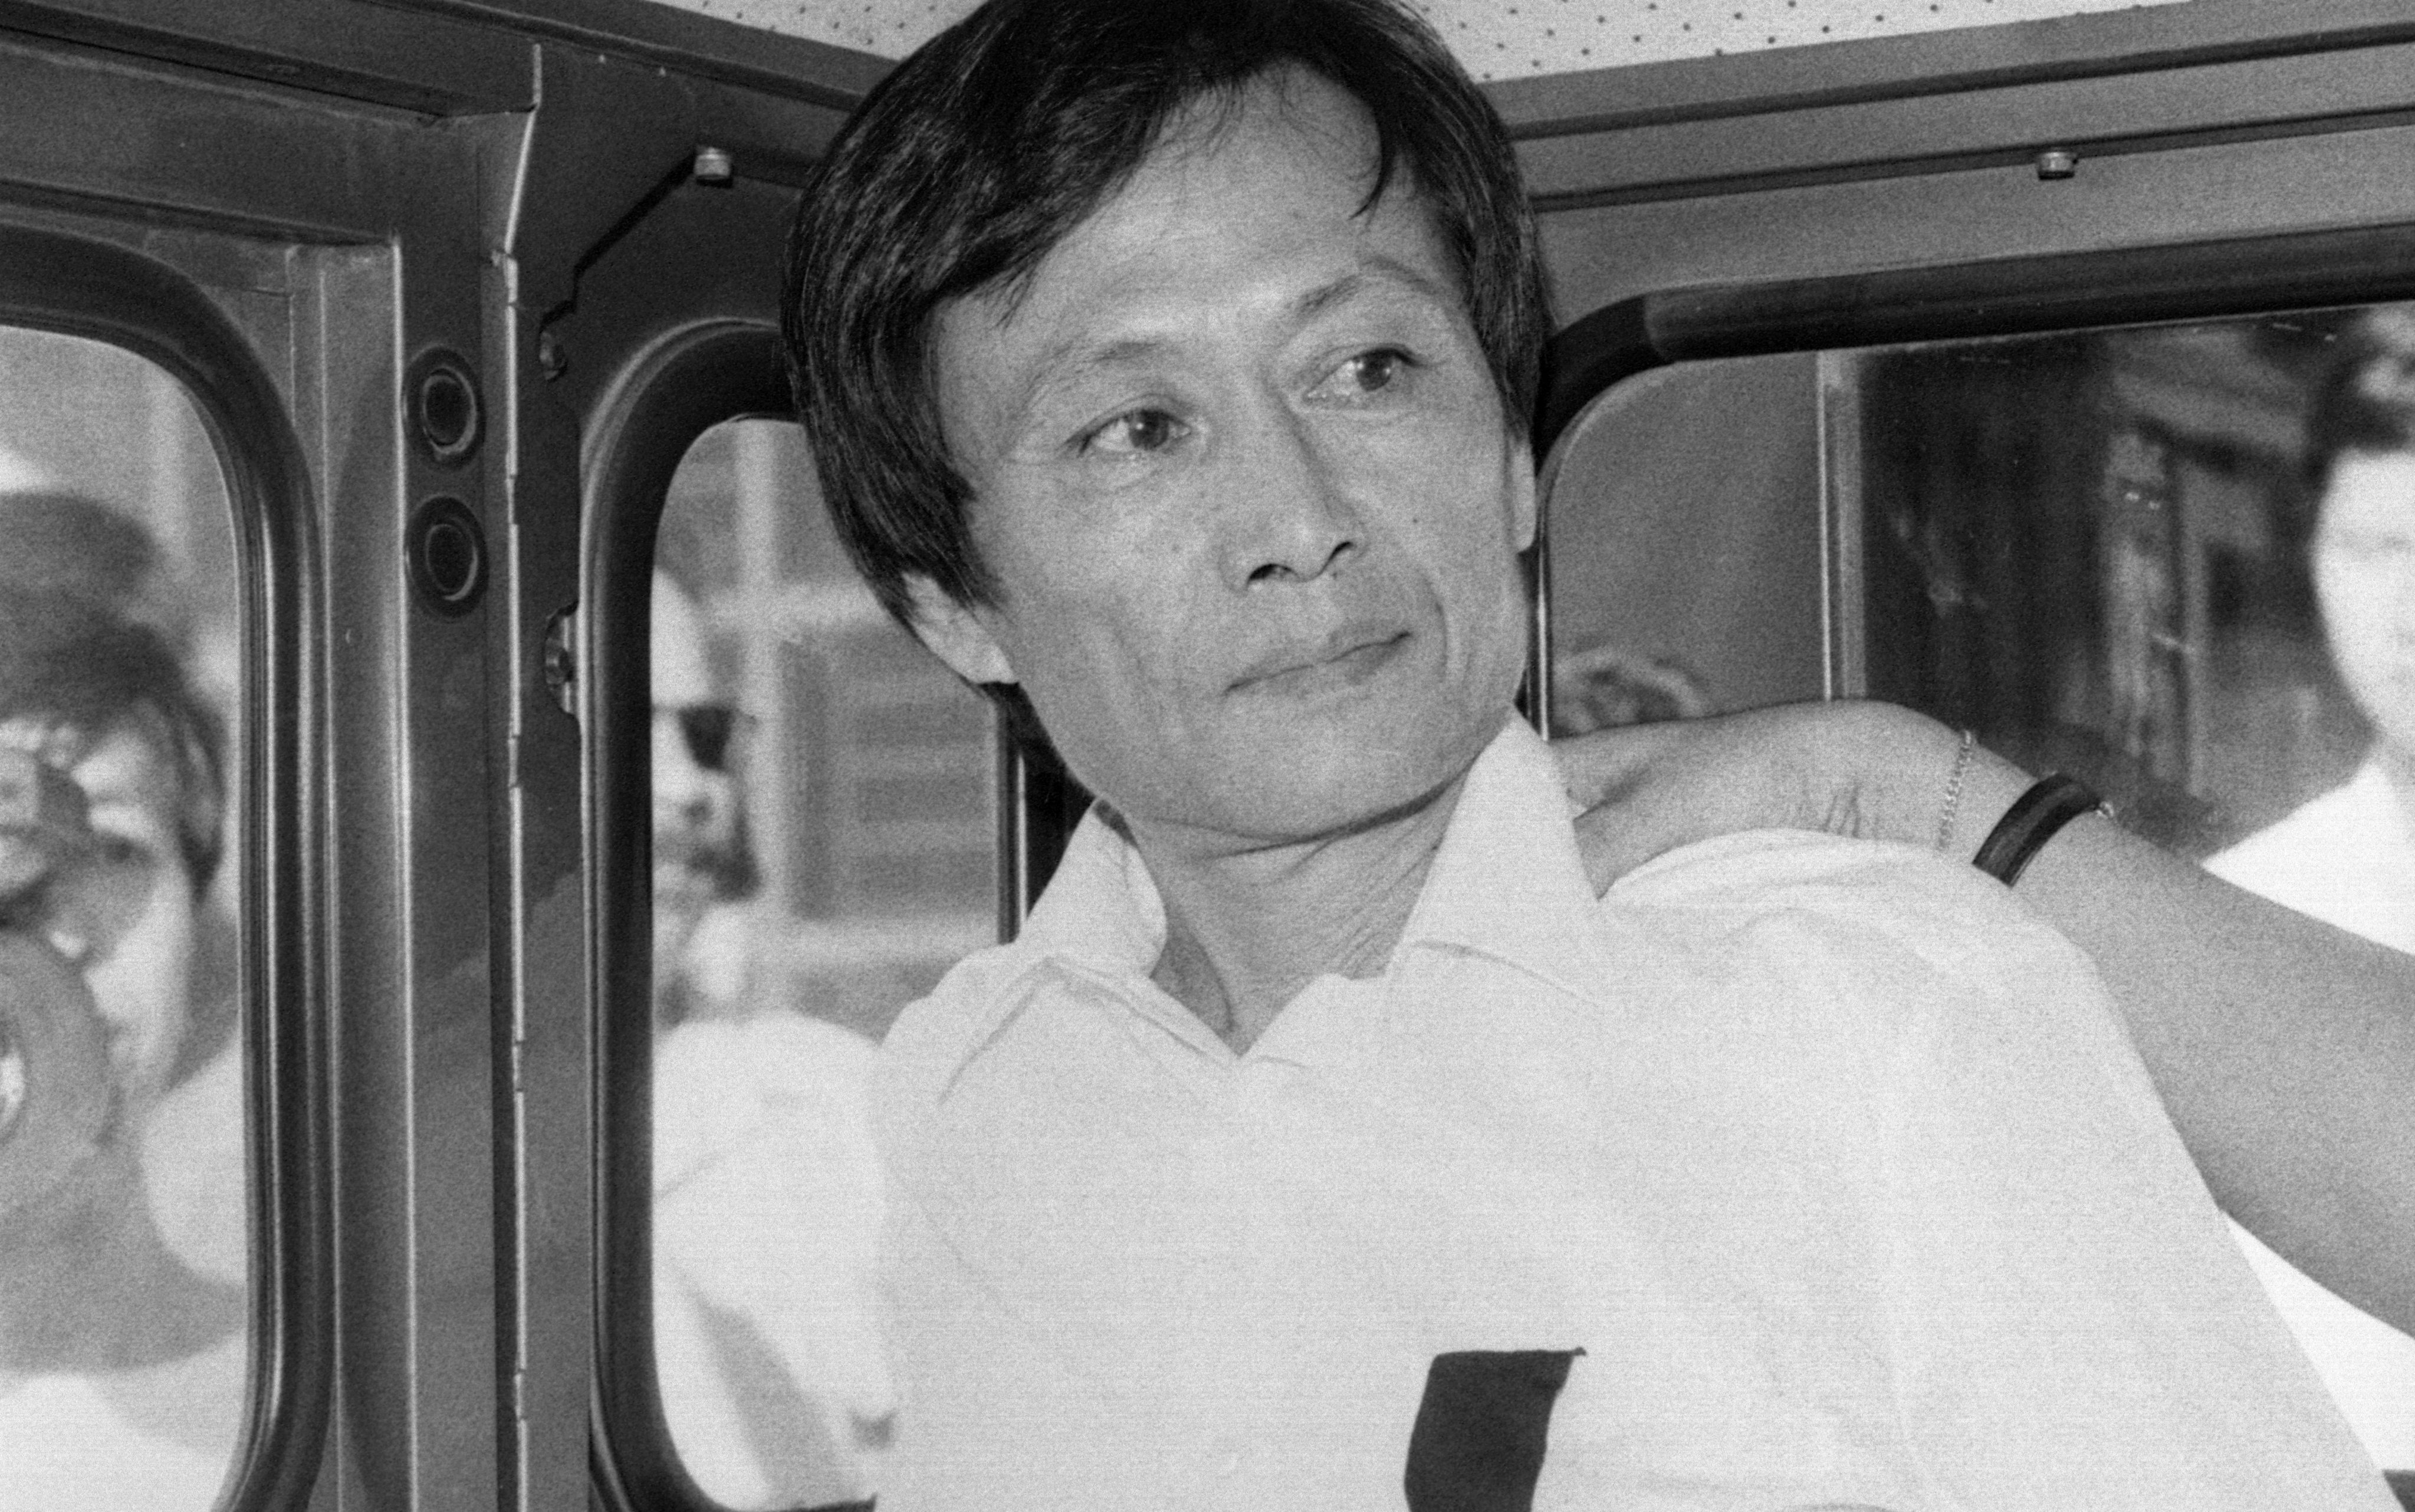 Law Kong (L) on his way back to prison. Law was sent back to the Portuguese enclave from Hong Kong. He would have to serve forty years in jail as he committed crimes, including murder, rape, wounding and robbery, in Macau in 1967. His identity was discovered only when he applied for a Hong Kong identity card.30JUL86 SCMP / Oliver Tsang